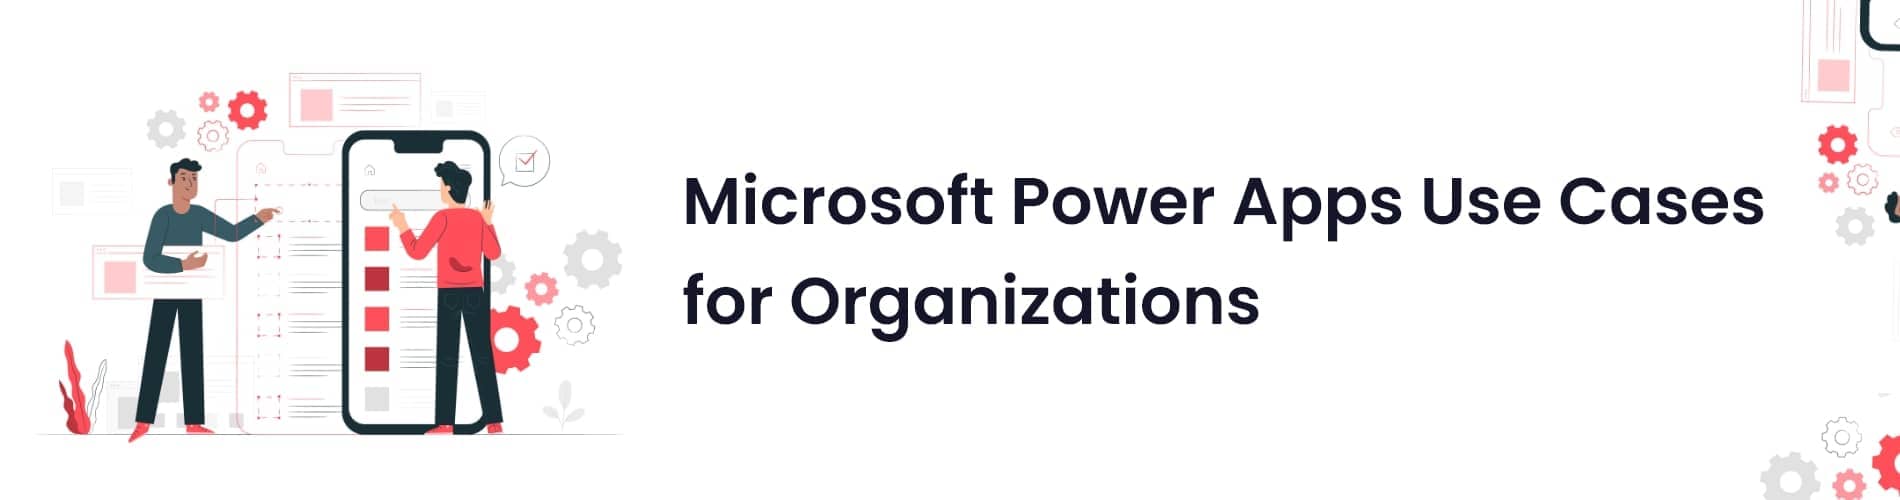 Microsoft PowerApps use cases